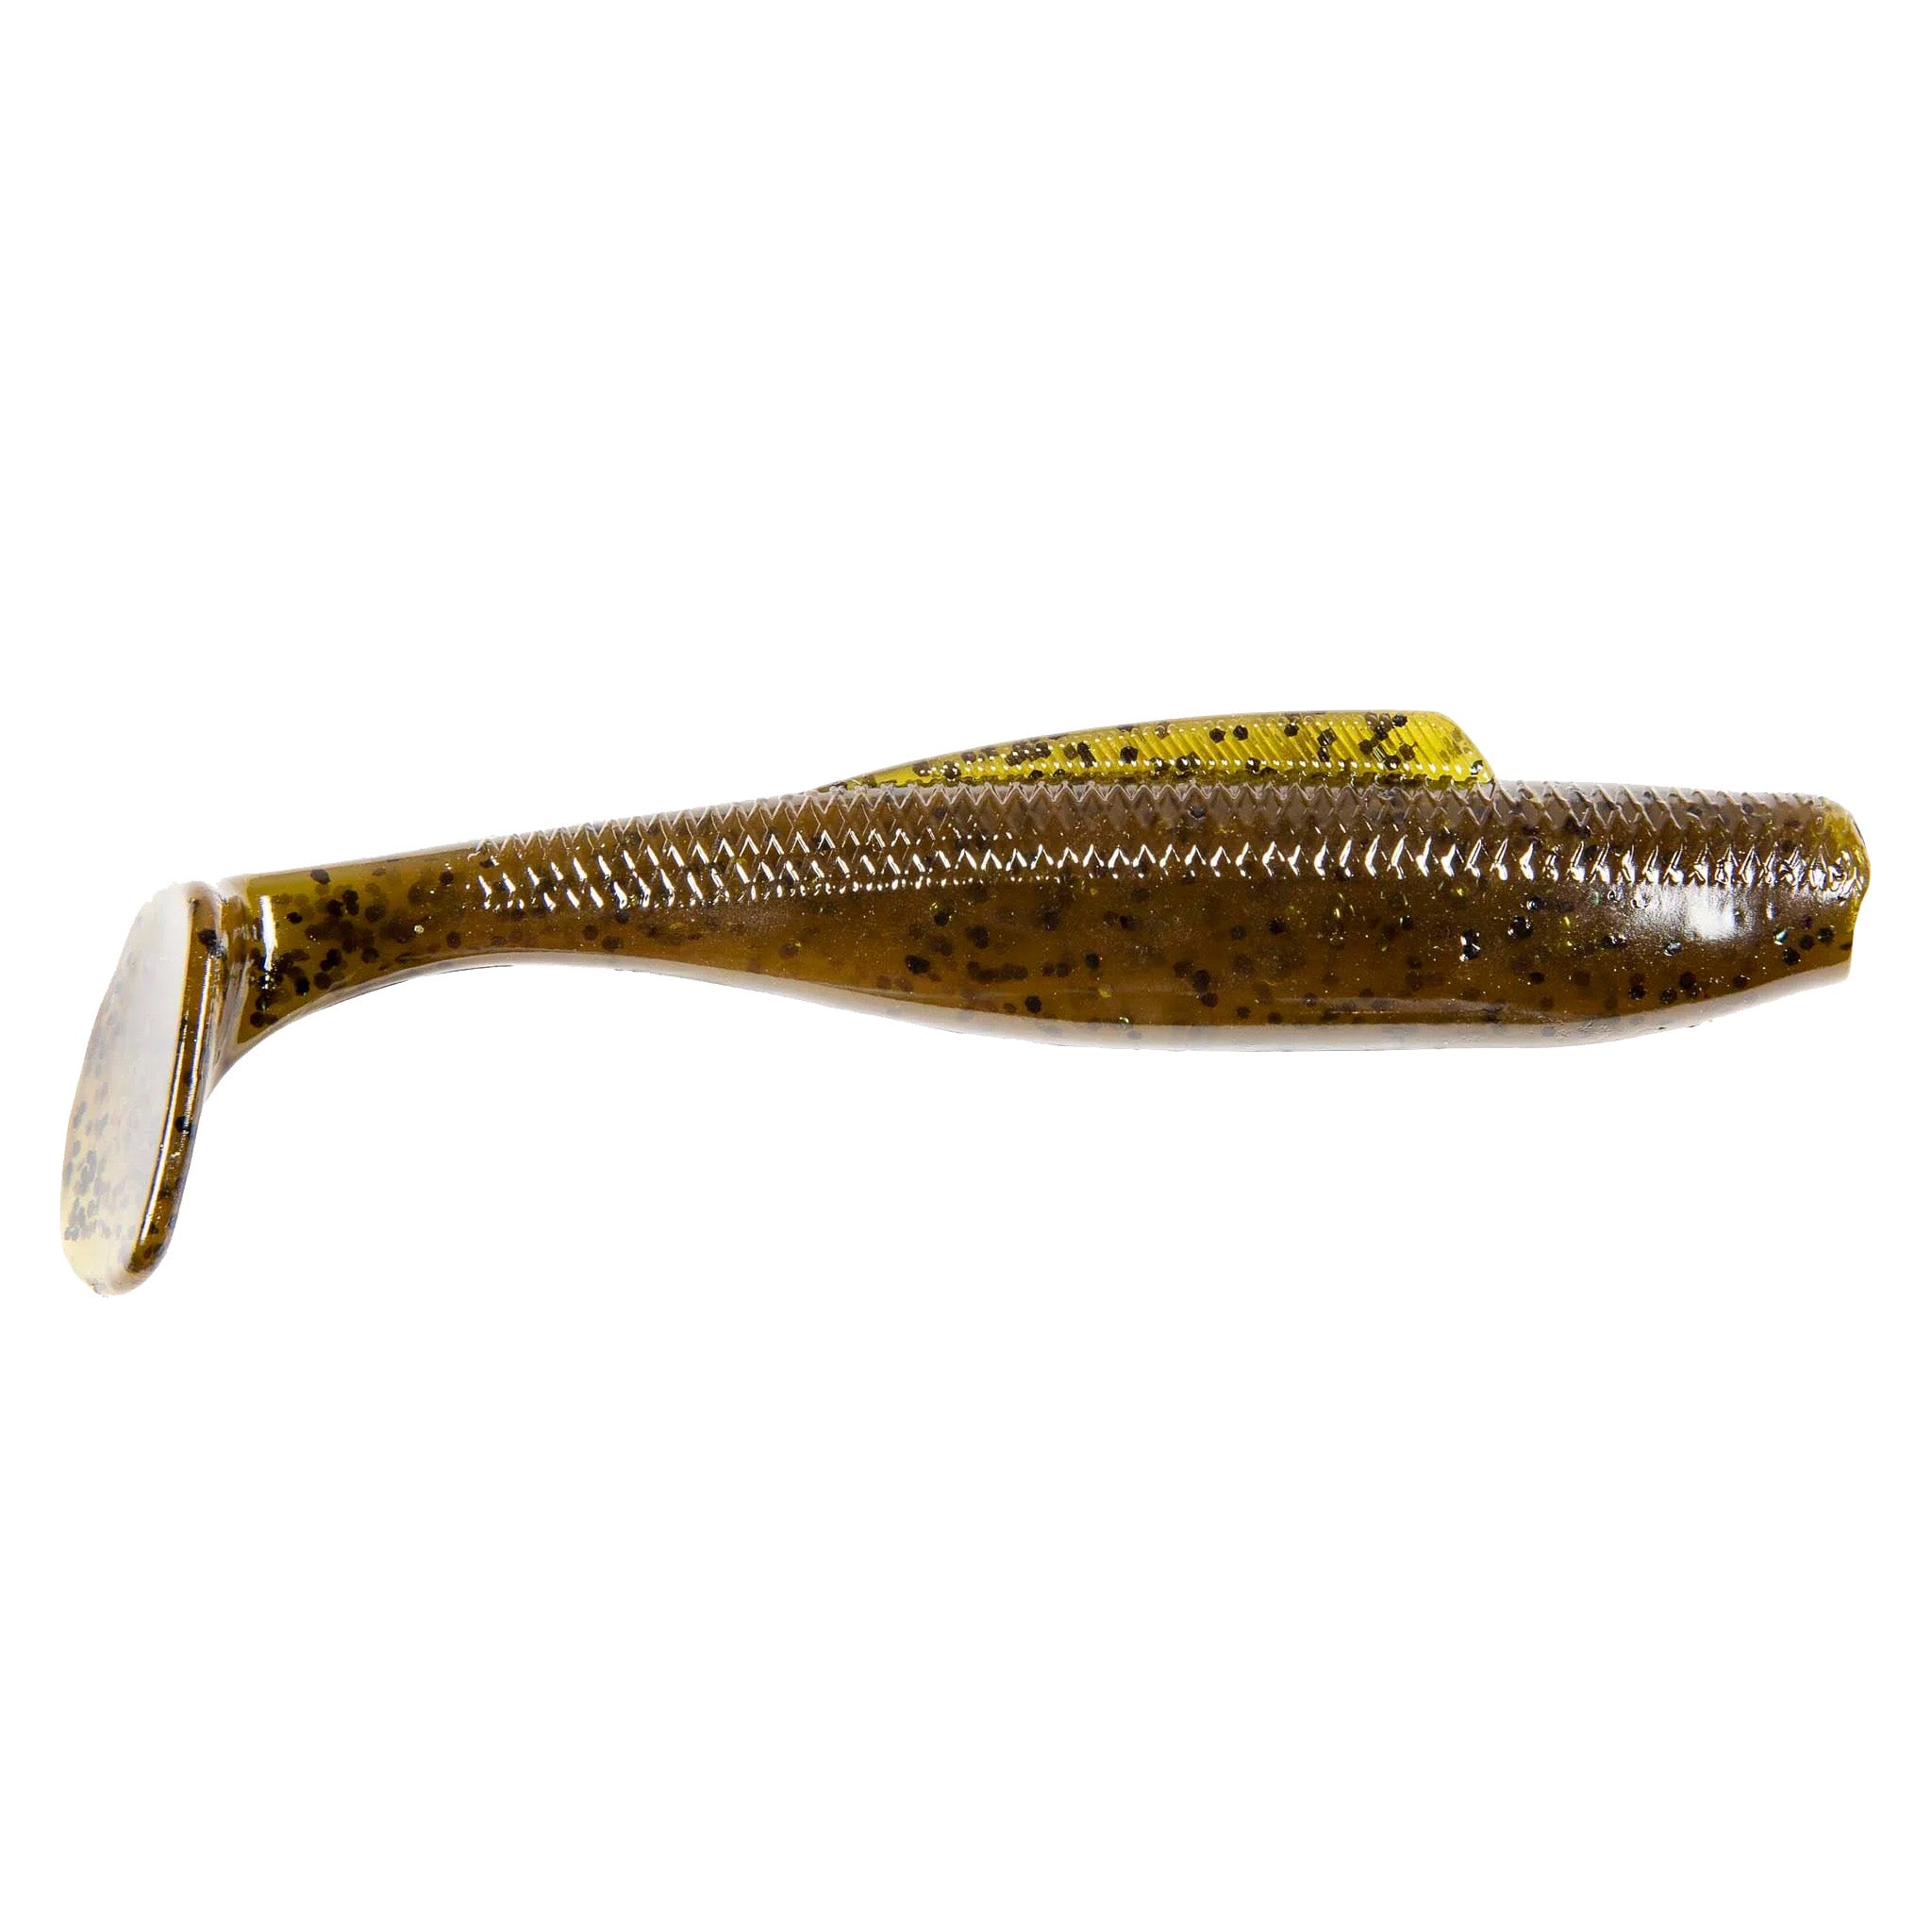 Why this is One of the BEST Saltwater Lures- Zman Diezel Minnowz